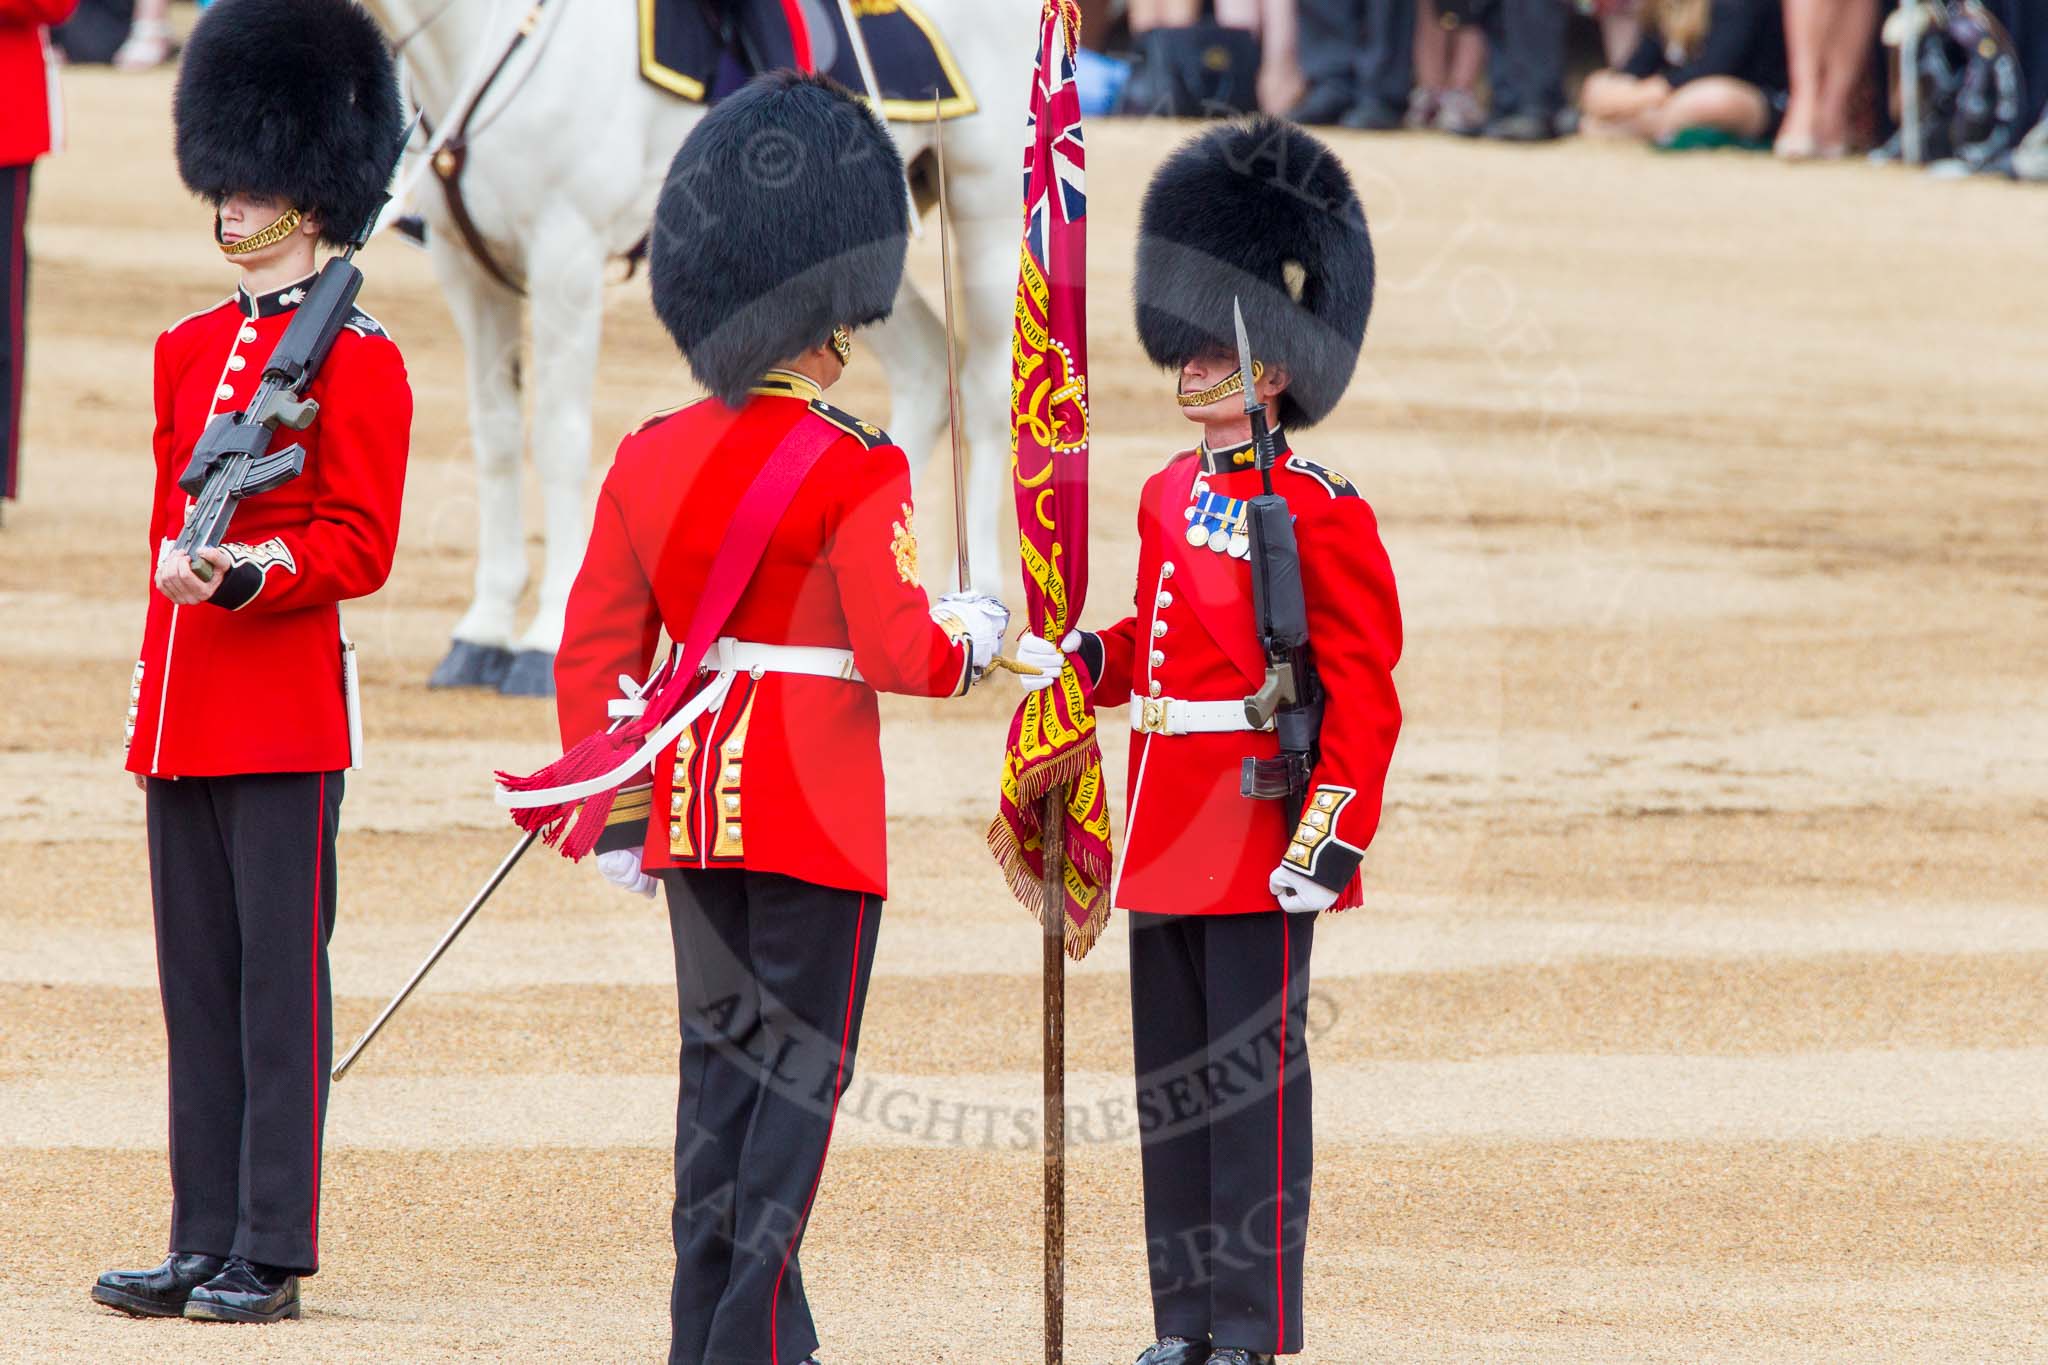 Trooping the Colour 2014.
Horse Guards Parade, Westminster,
London SW1A,

United Kingdom,
on 14 June 2014 at 11:21, image #524